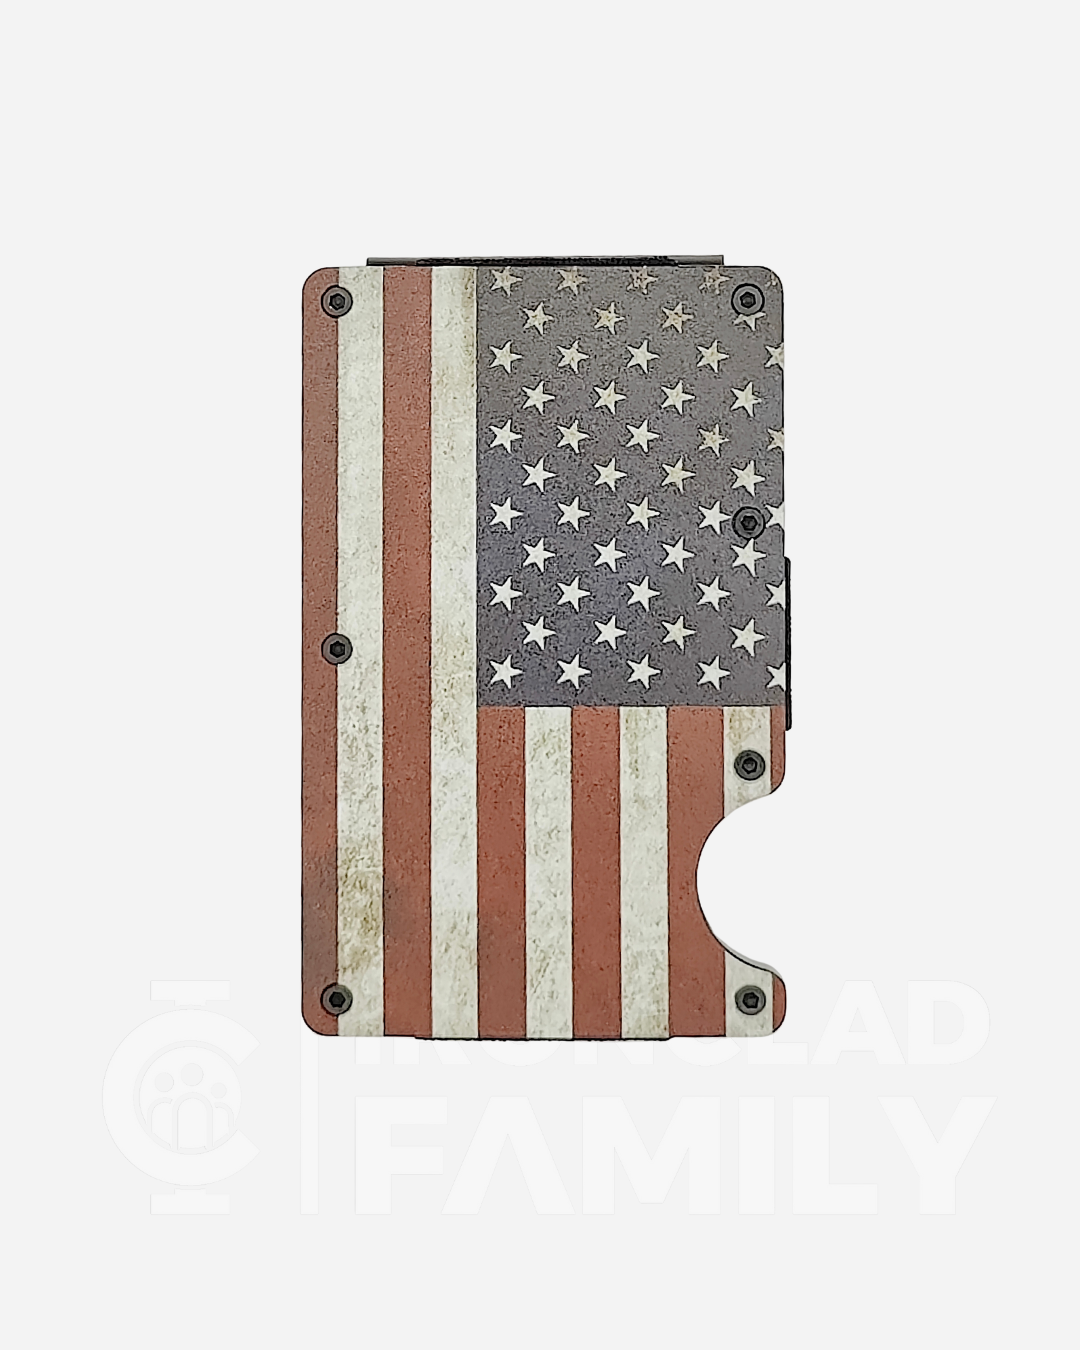 RFID blocking wallet with American flag design and metal casing